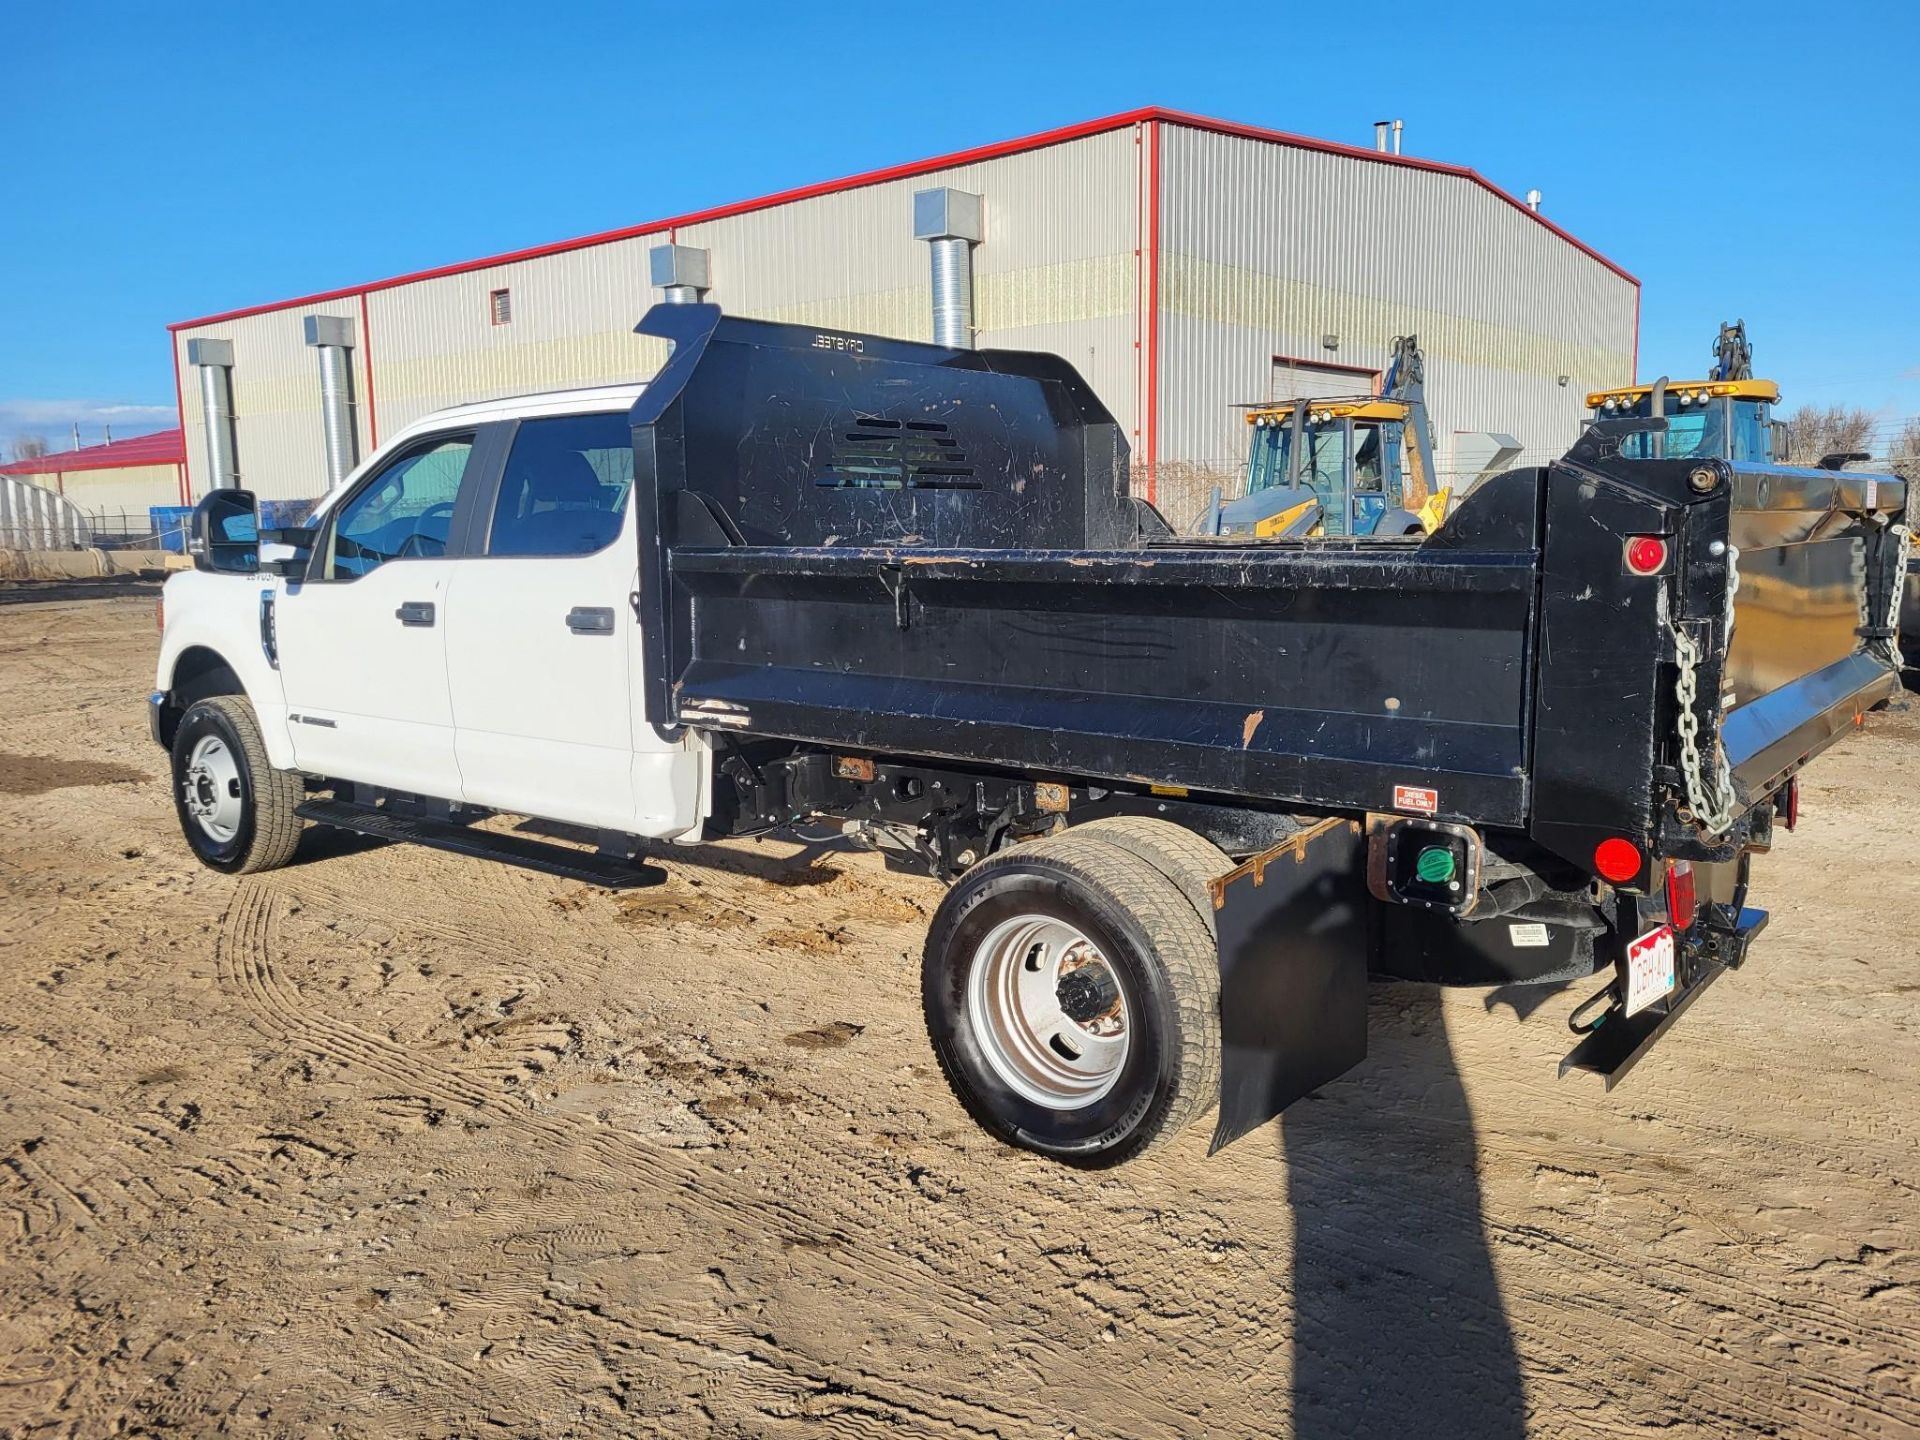 2021 FORD F350 CREW CAB DUALLY DIESEL FLATBED DUMP TRUCK 19,500 MILES! - Image 11 of 37